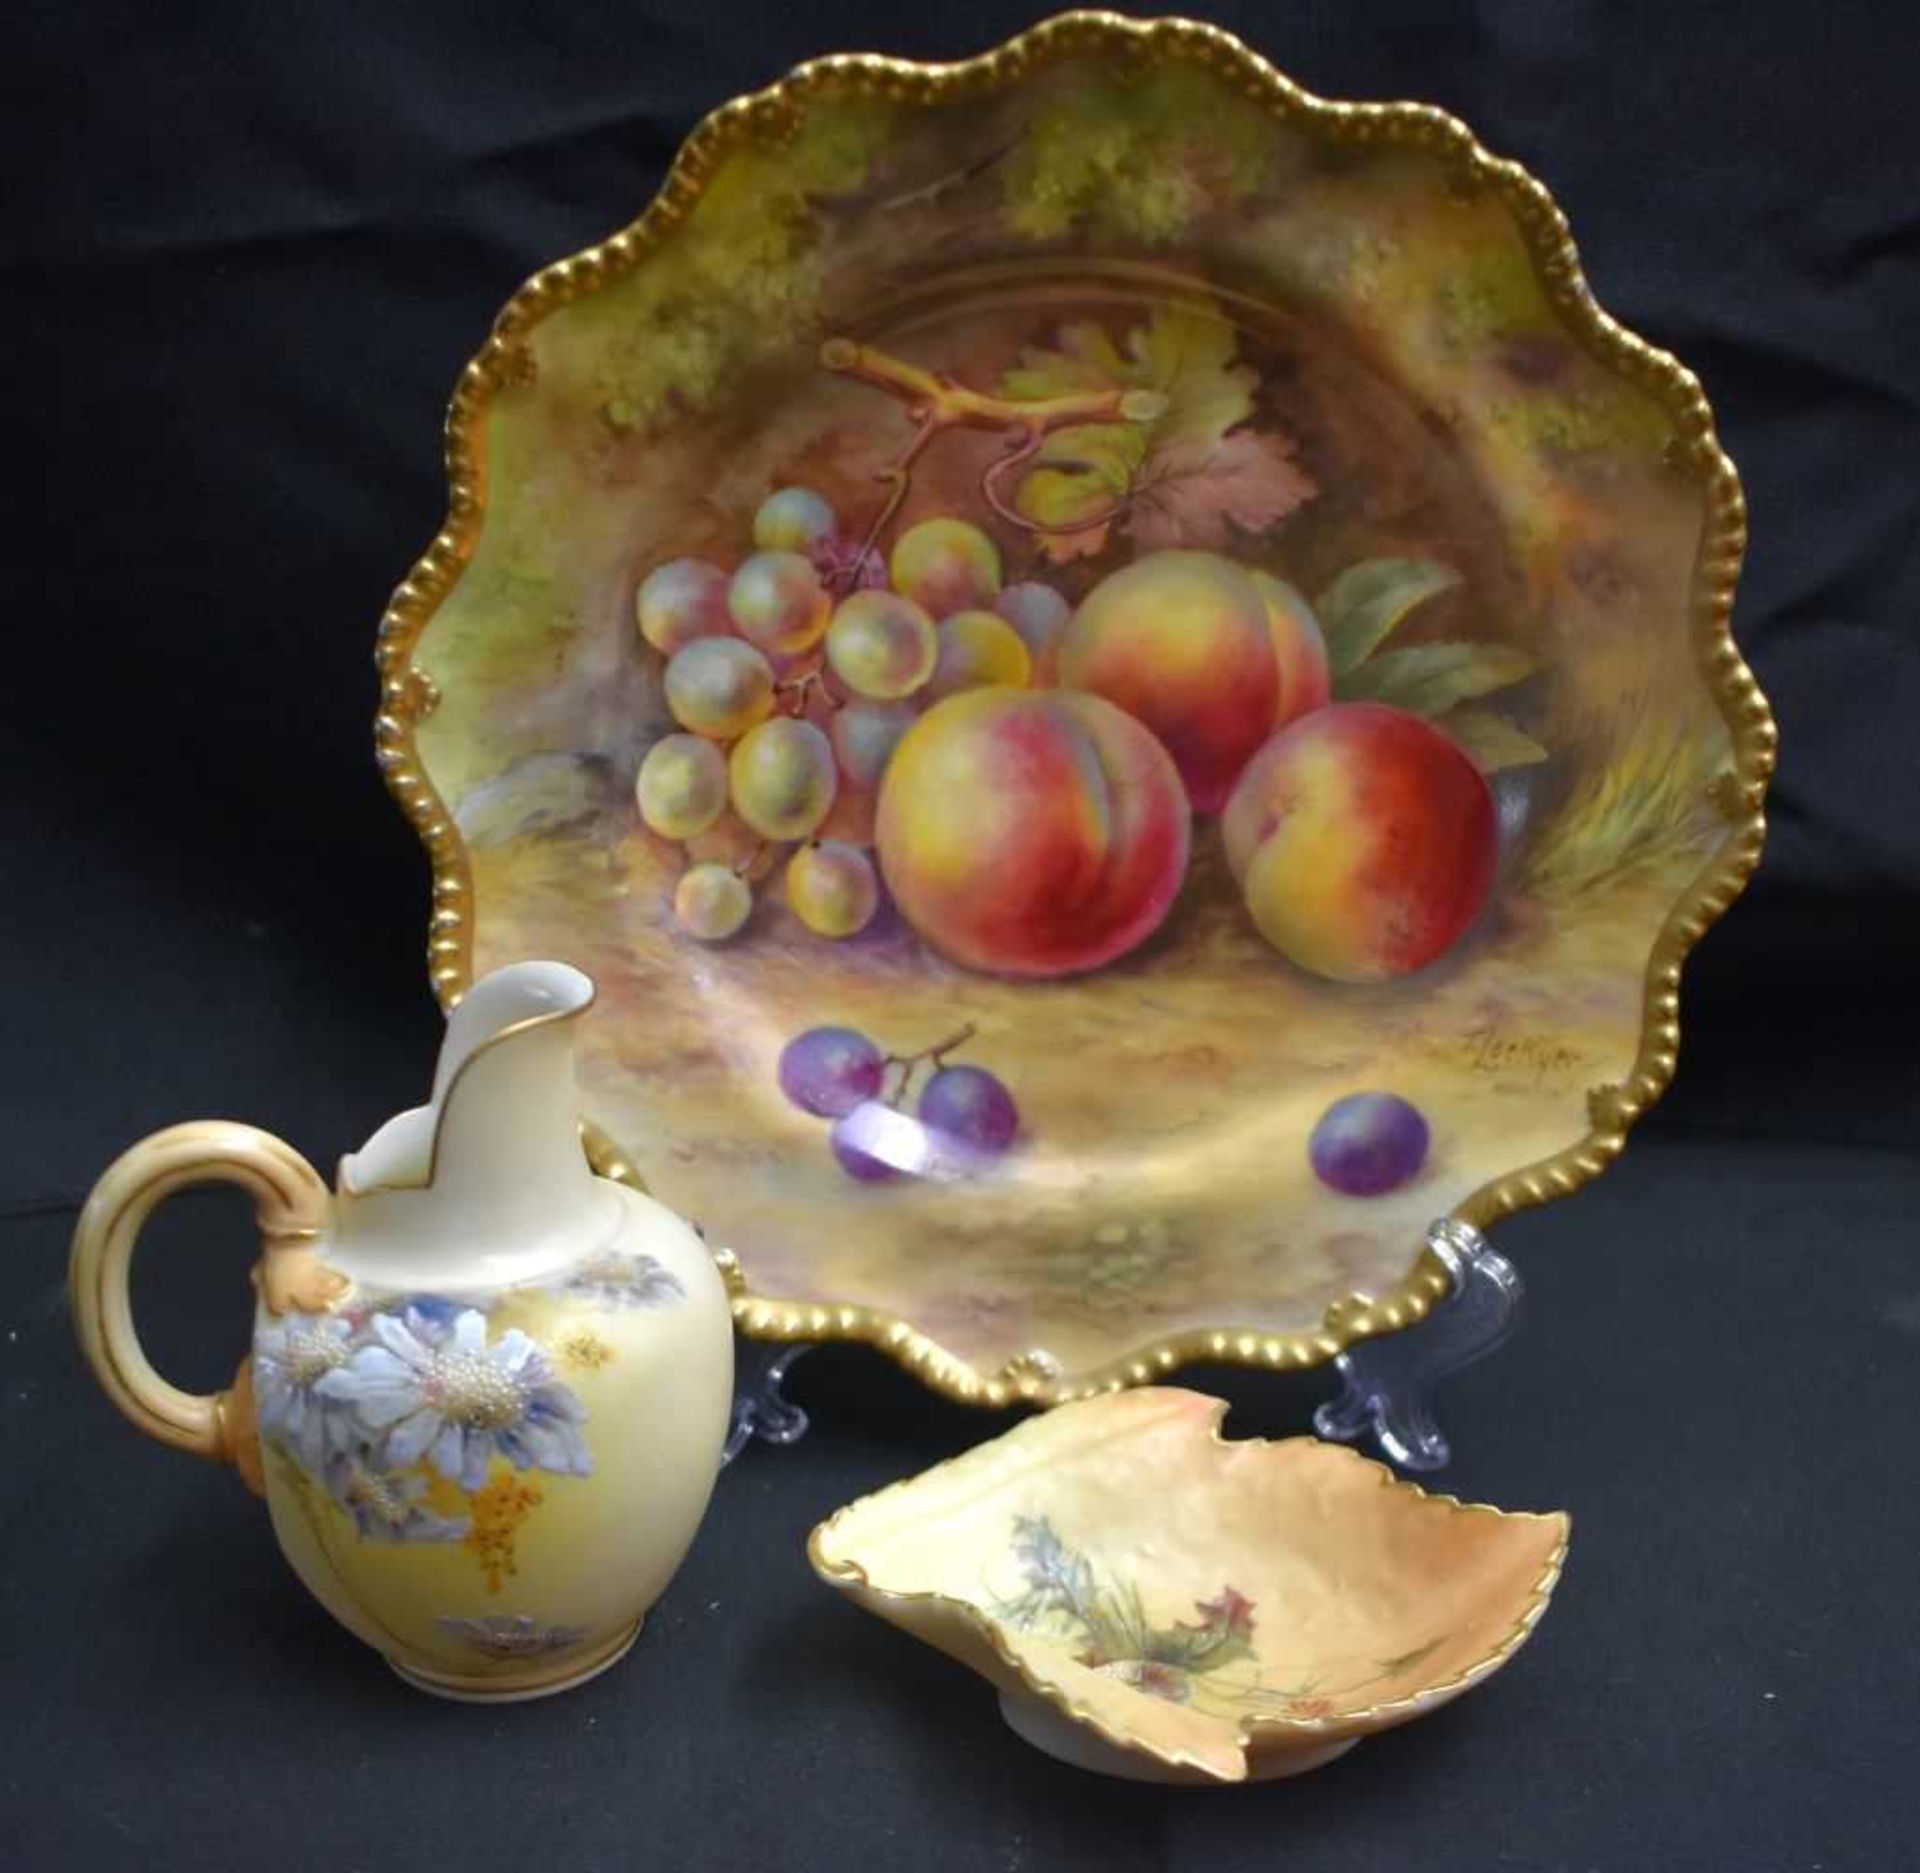 A ROYAL WORCESTER FRUIT PAINTED PORCELAIN SCALLOPED PLATE by Lockyer, together with a blush ivory